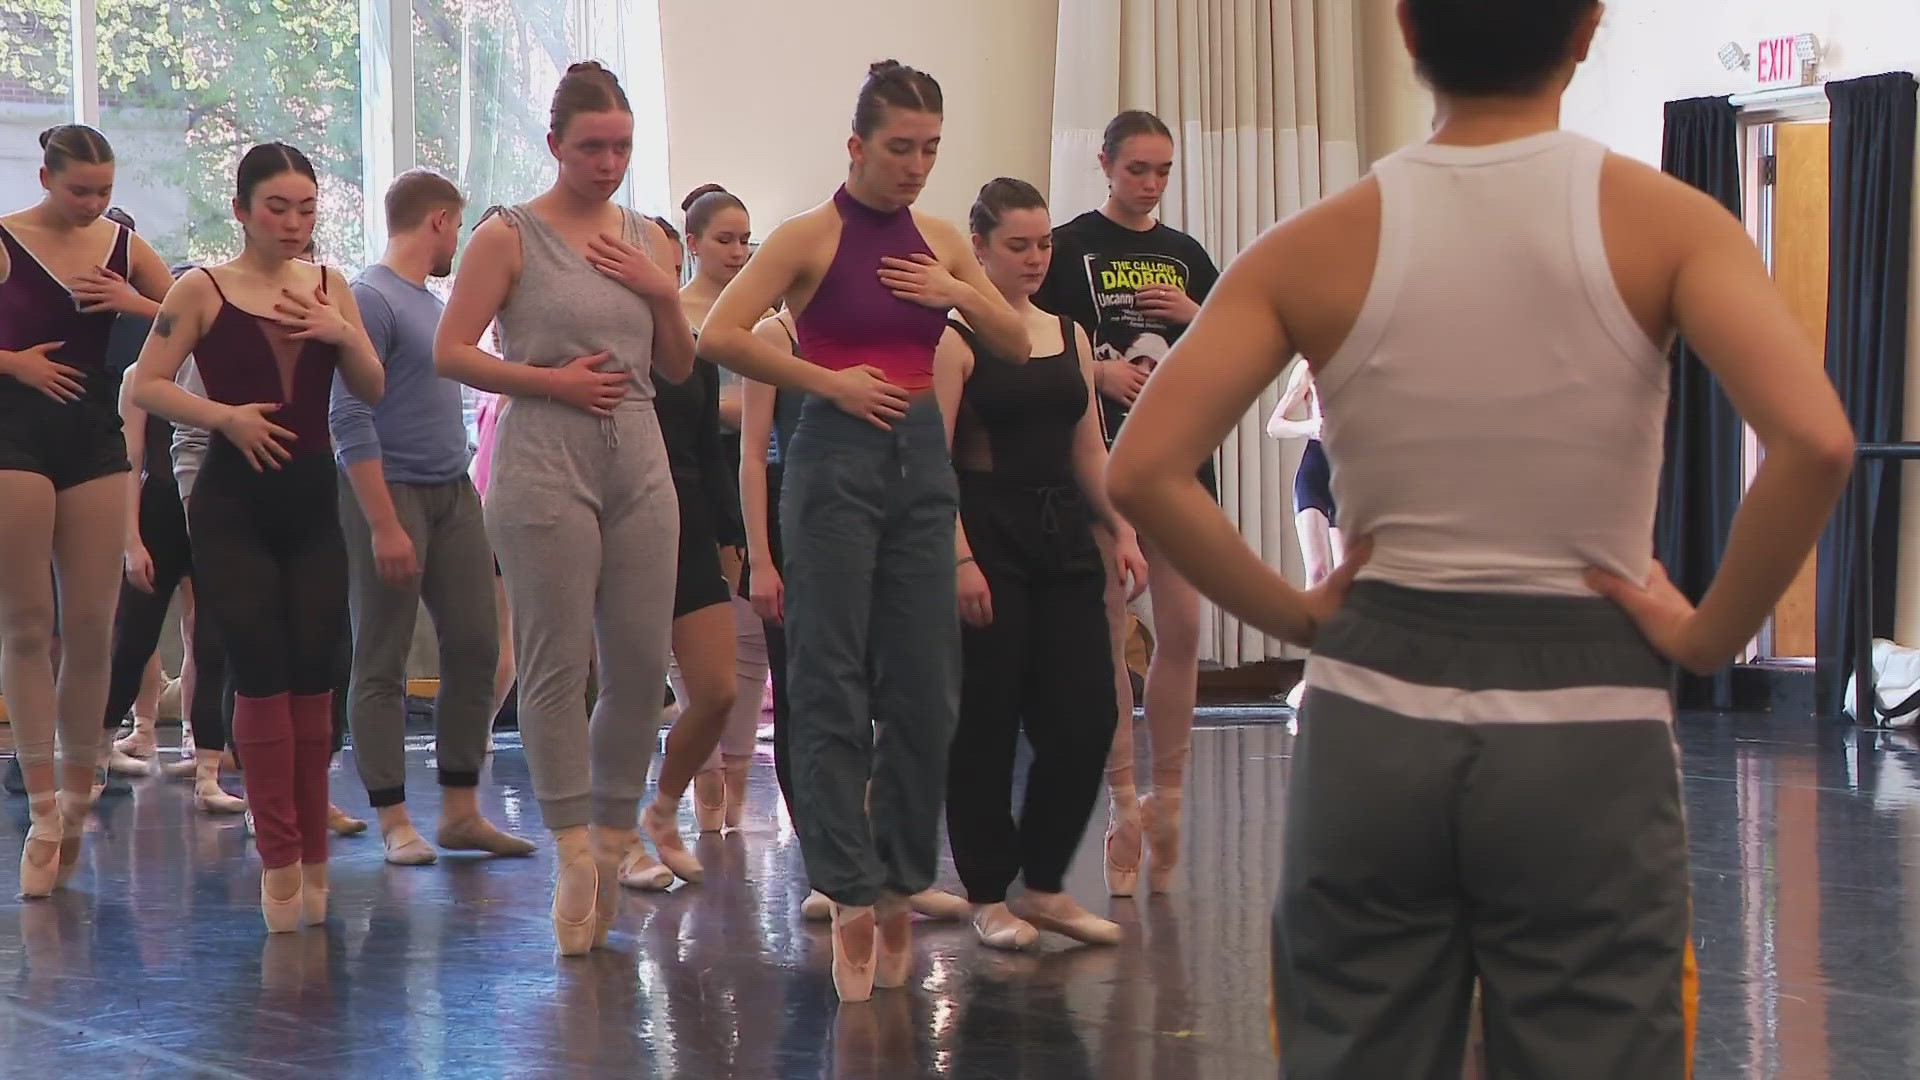 Officials said the electrifying performance utilizing Jack Harlow's music, called 502, is a one-of-a-kind integration between ballet and contemporary music.